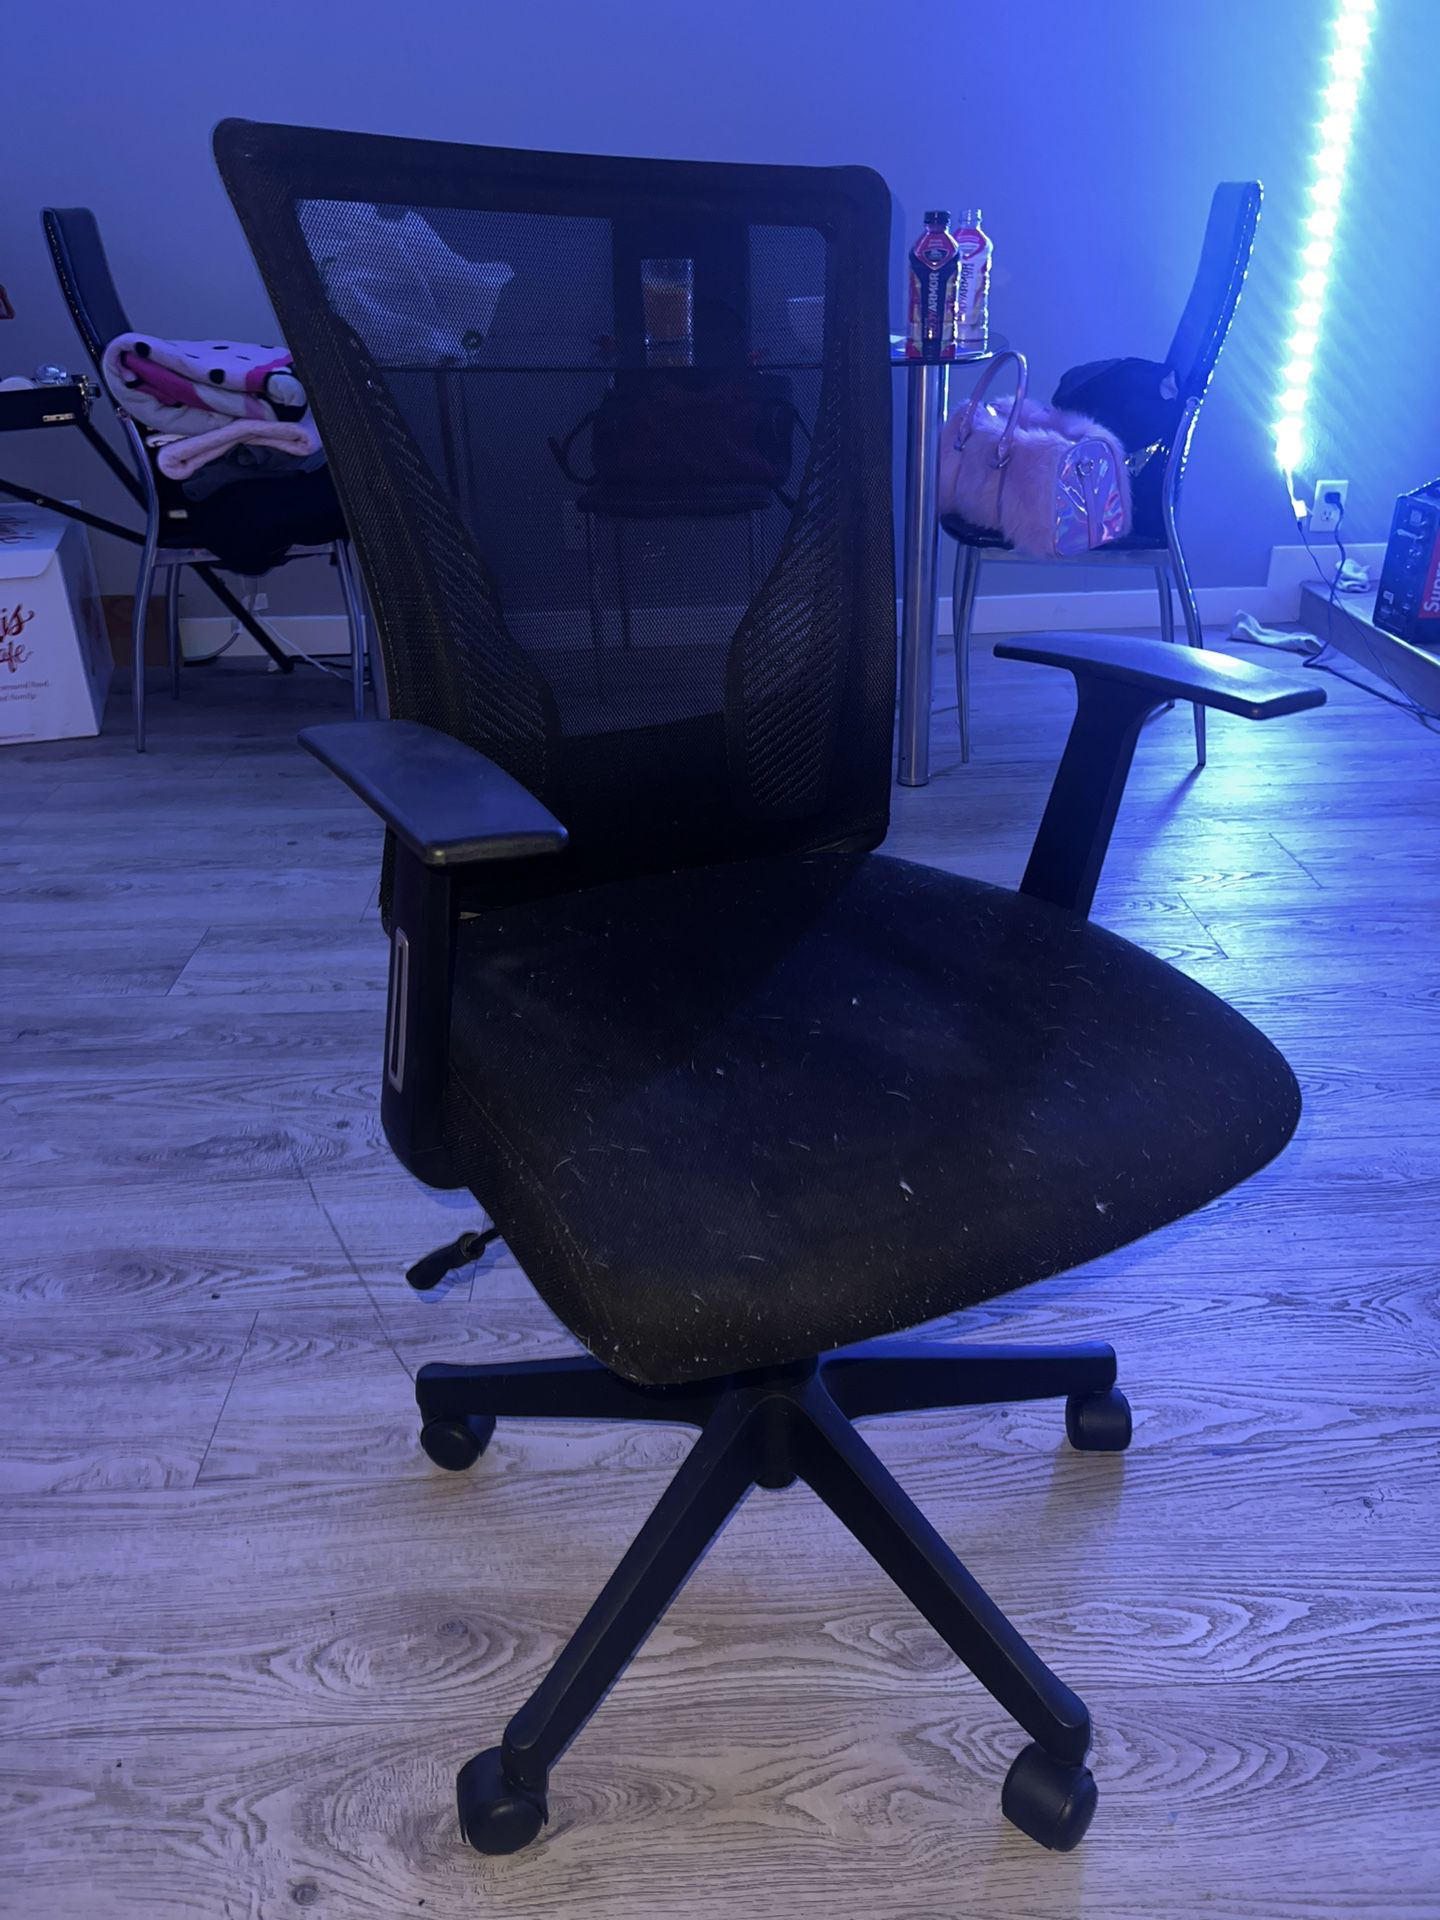 $20 OFFICE CHAIR